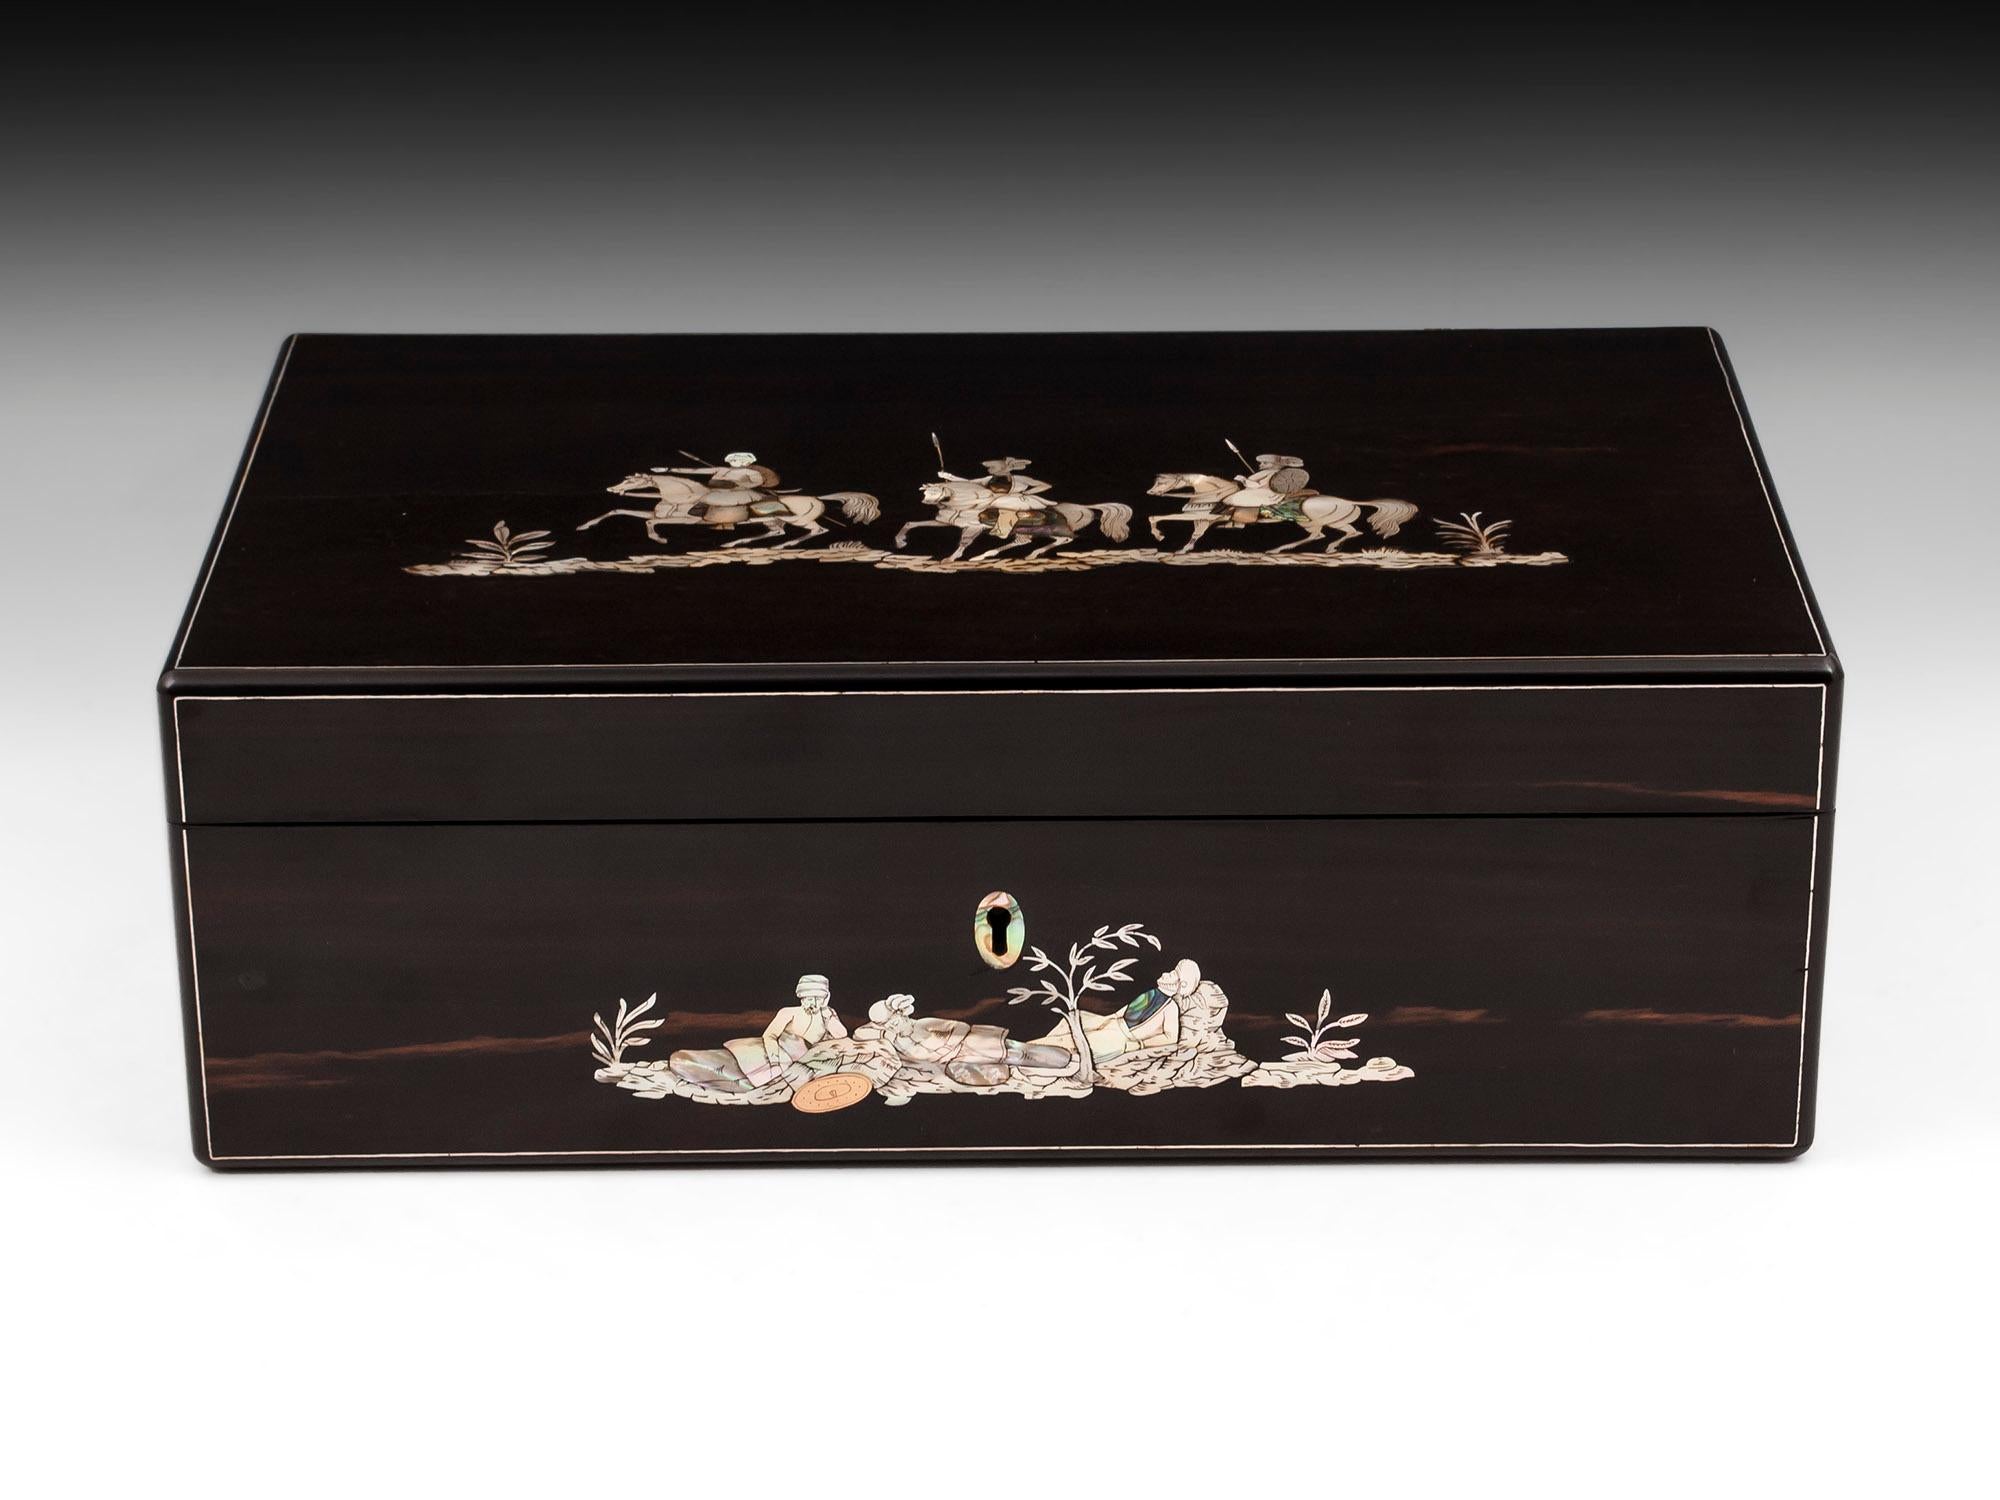 Magnificent coromandel writing slope by W.C. Fuller, London. Inlaid and engraved in mother-of-pearl, abalone and brass with three exotic warriors on horseback with shields and spears to the top, the front of the box depicting their overnight